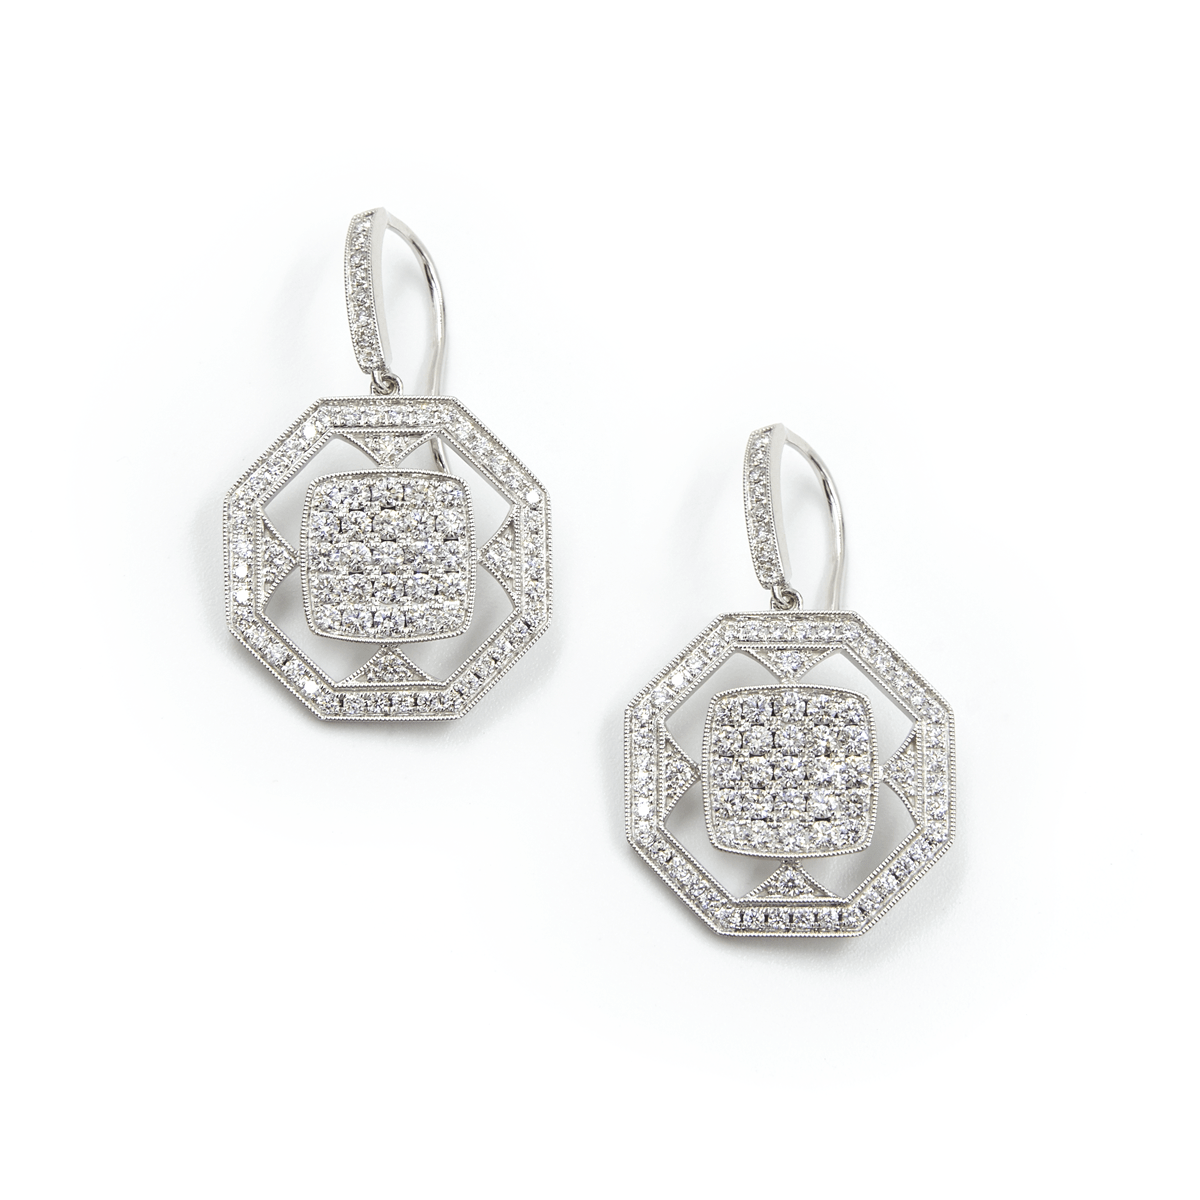 CHRIS AIRE DIAMOND EARRINGS - Chris Aire Fine Jewelry & Timepieces